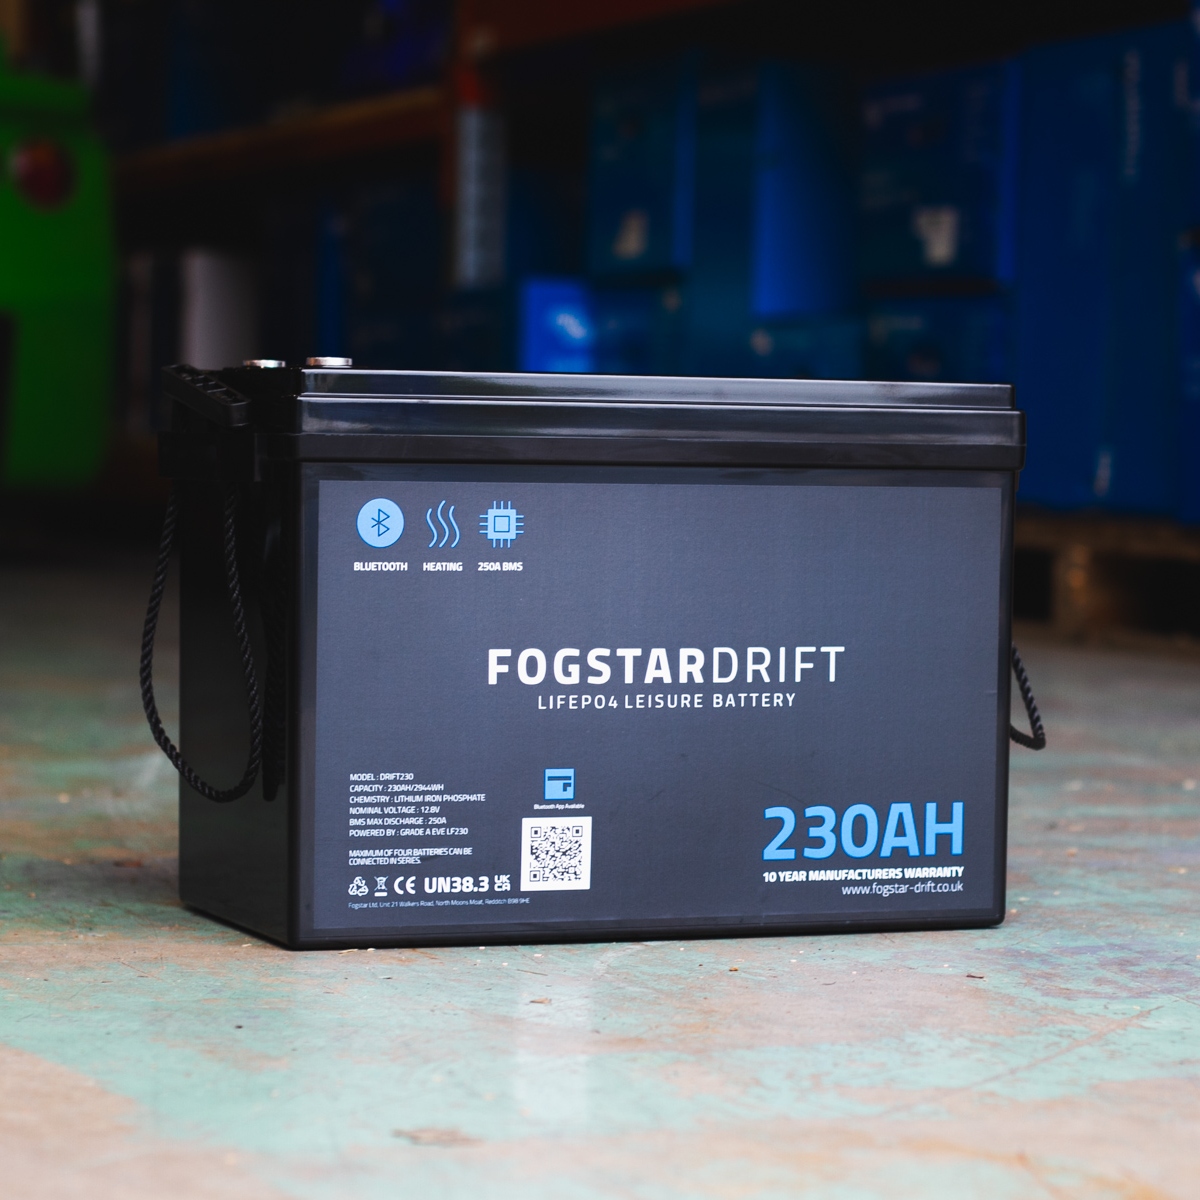 A Fogstar Drift 230Ah - 12V lithium leisure battery with a robust 230Ah capacity is sitting on a warehouse floor.